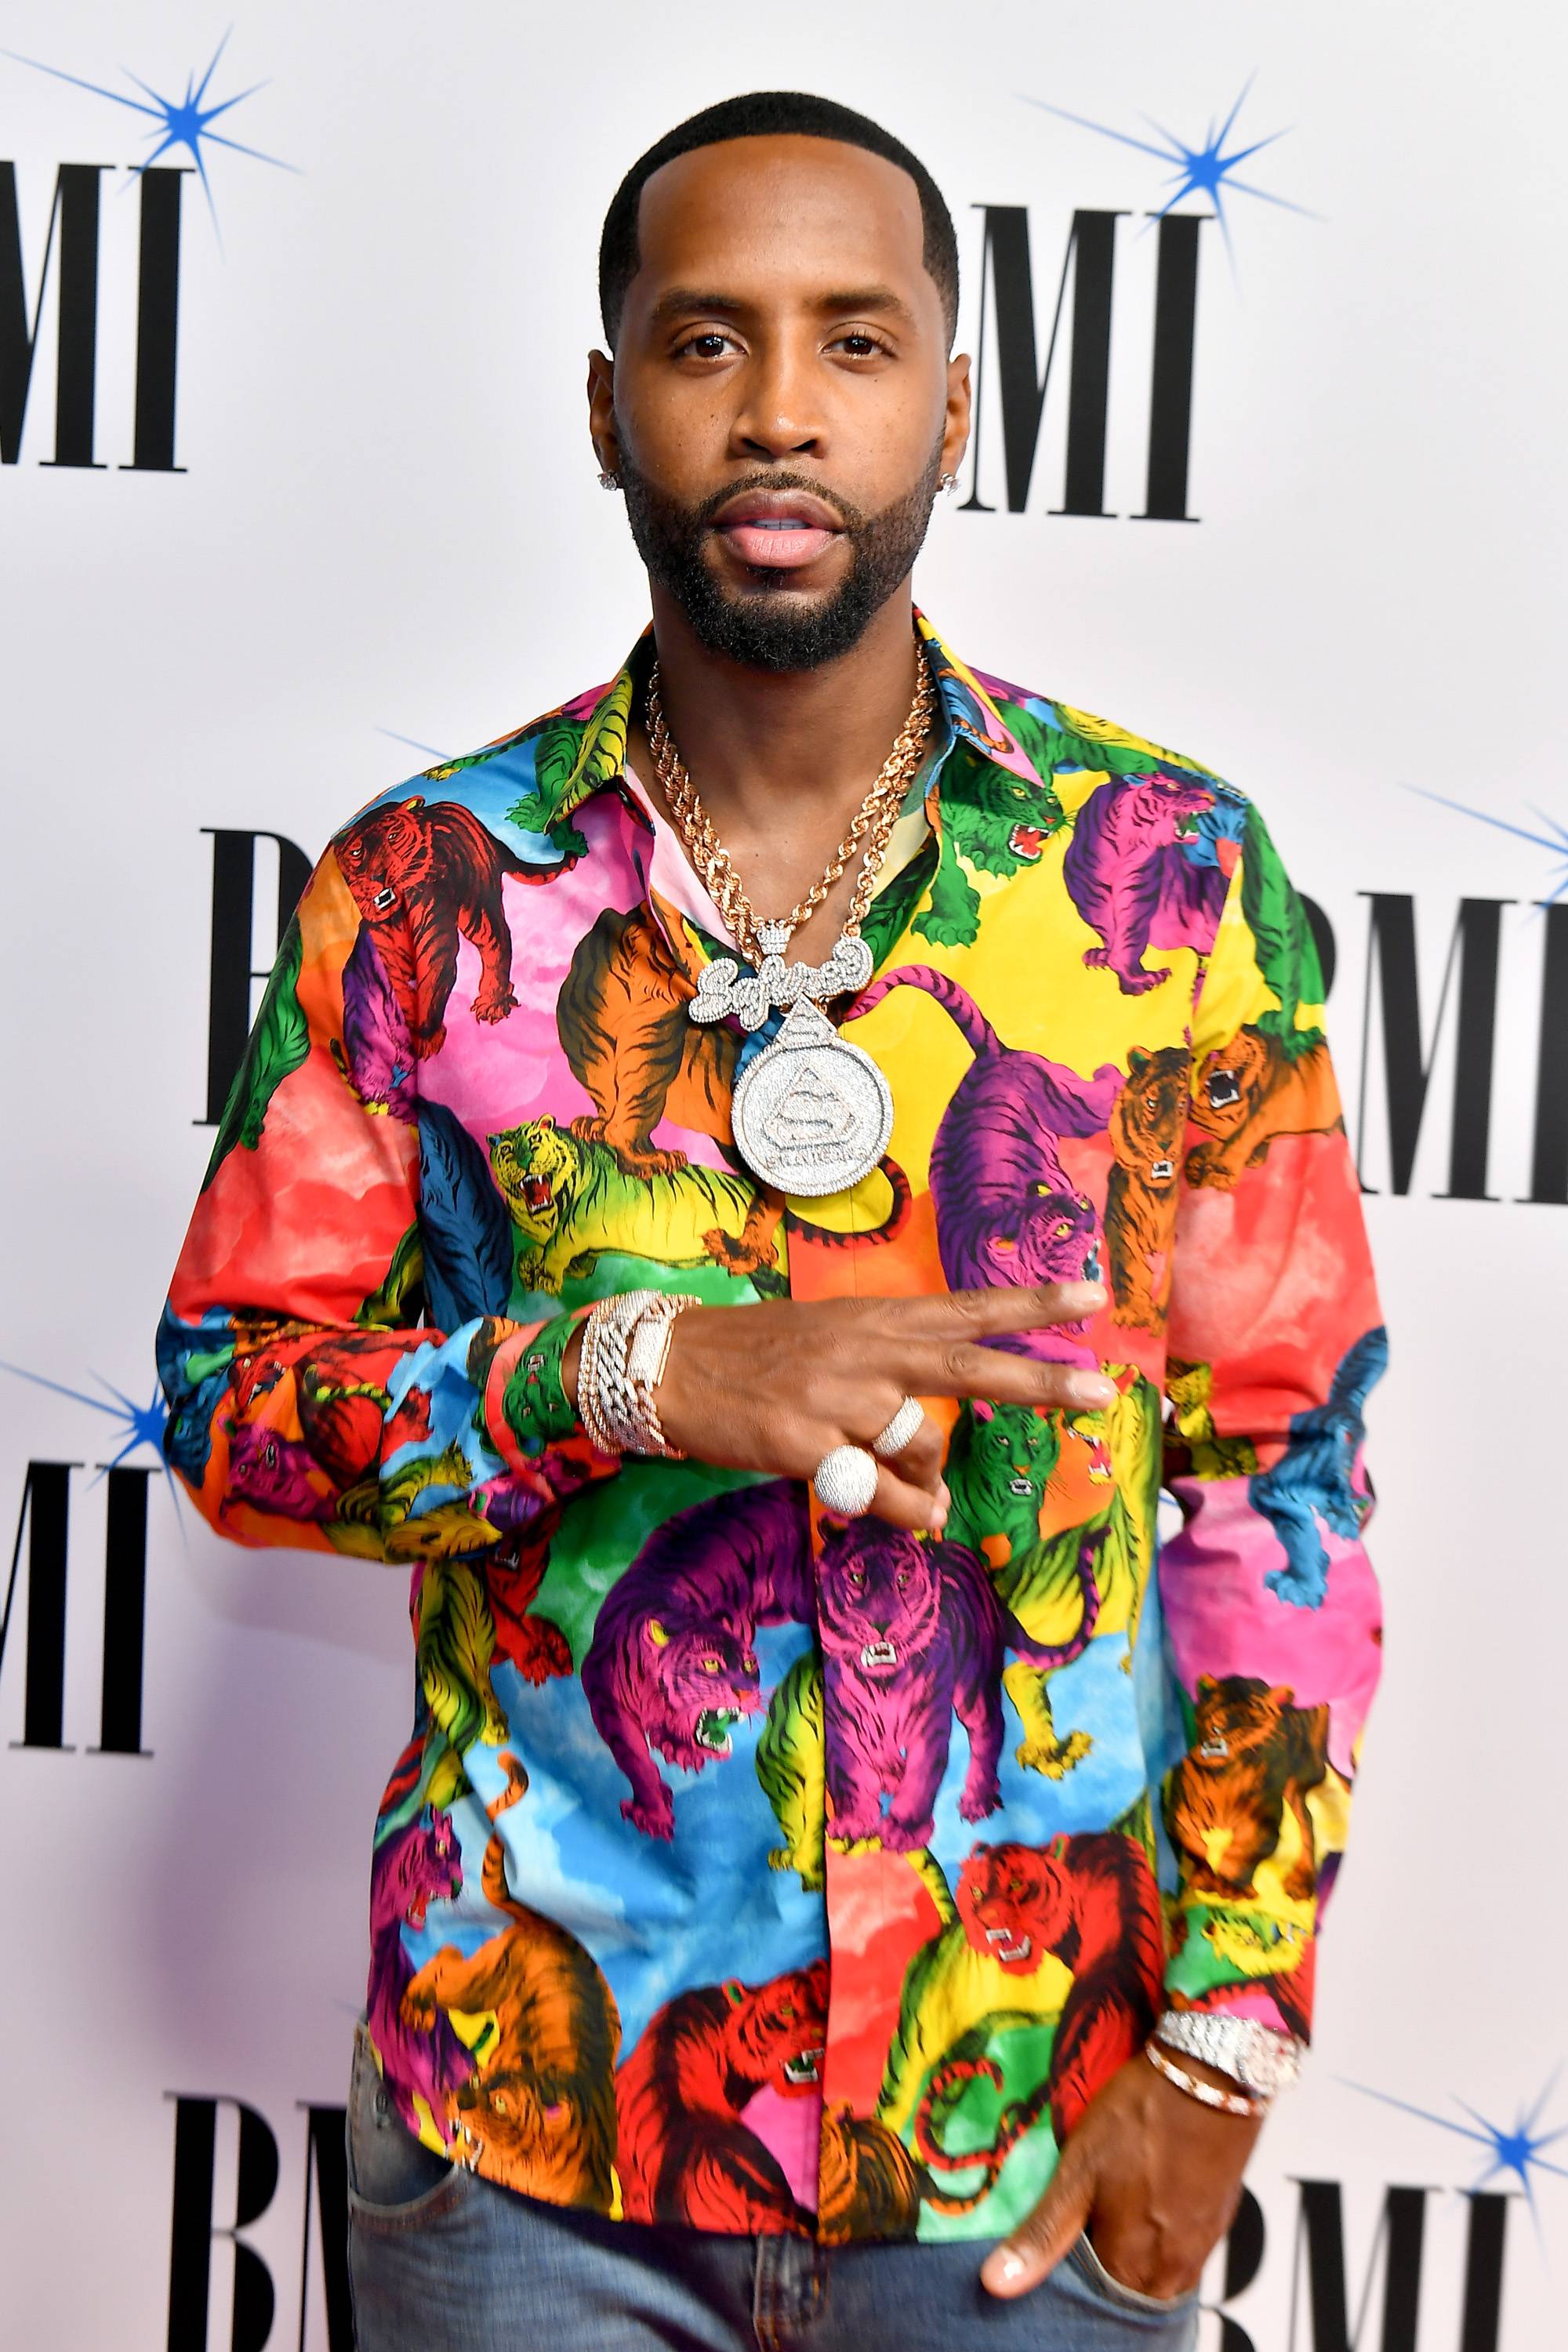 SANDY SPRINGS, GEORGIA - AUGUST 29: Safaree attends The 2019 BMI R&B/Hip-Hop Awards at Sandy Springs Performing Arts Center on August 29, 2019 in Sandy Springs, Georgia. (Photo by Paras Griffin/Getty Images for BMI)